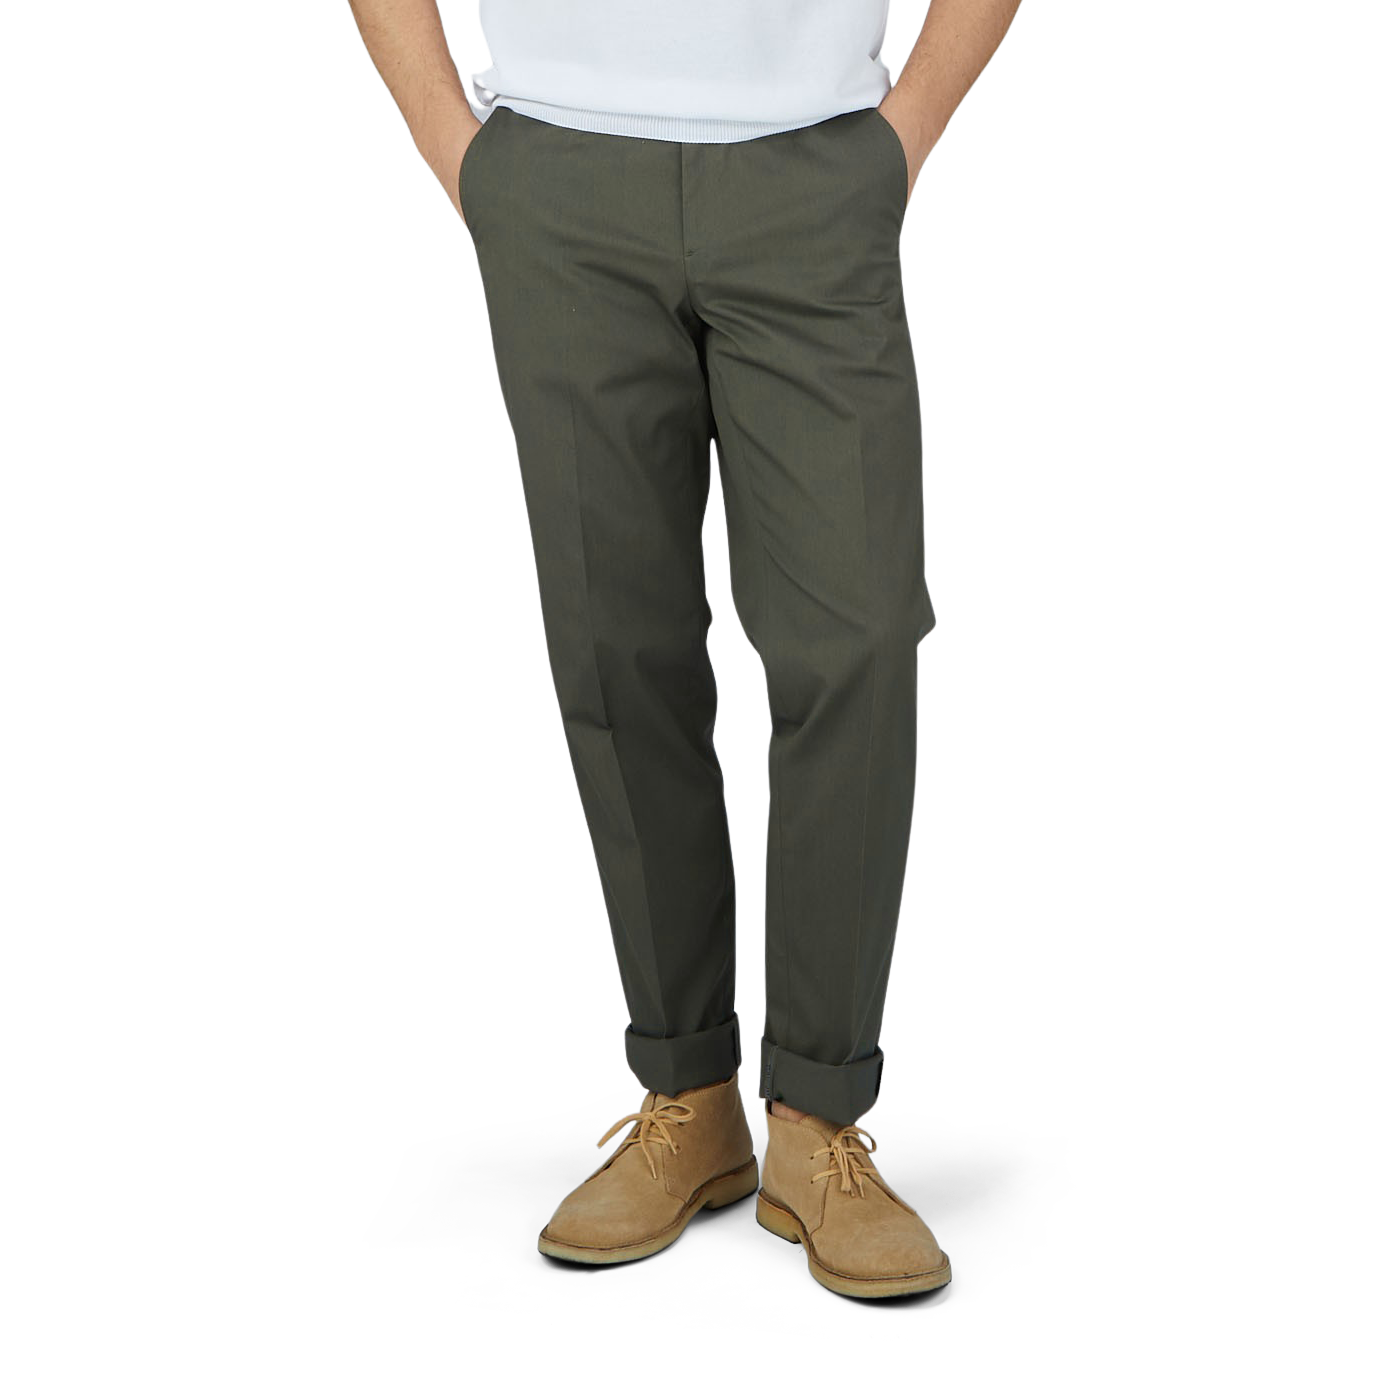 A man in Luigi Bianchi dark green cotton twill flat front trousers and a white t-shirt.